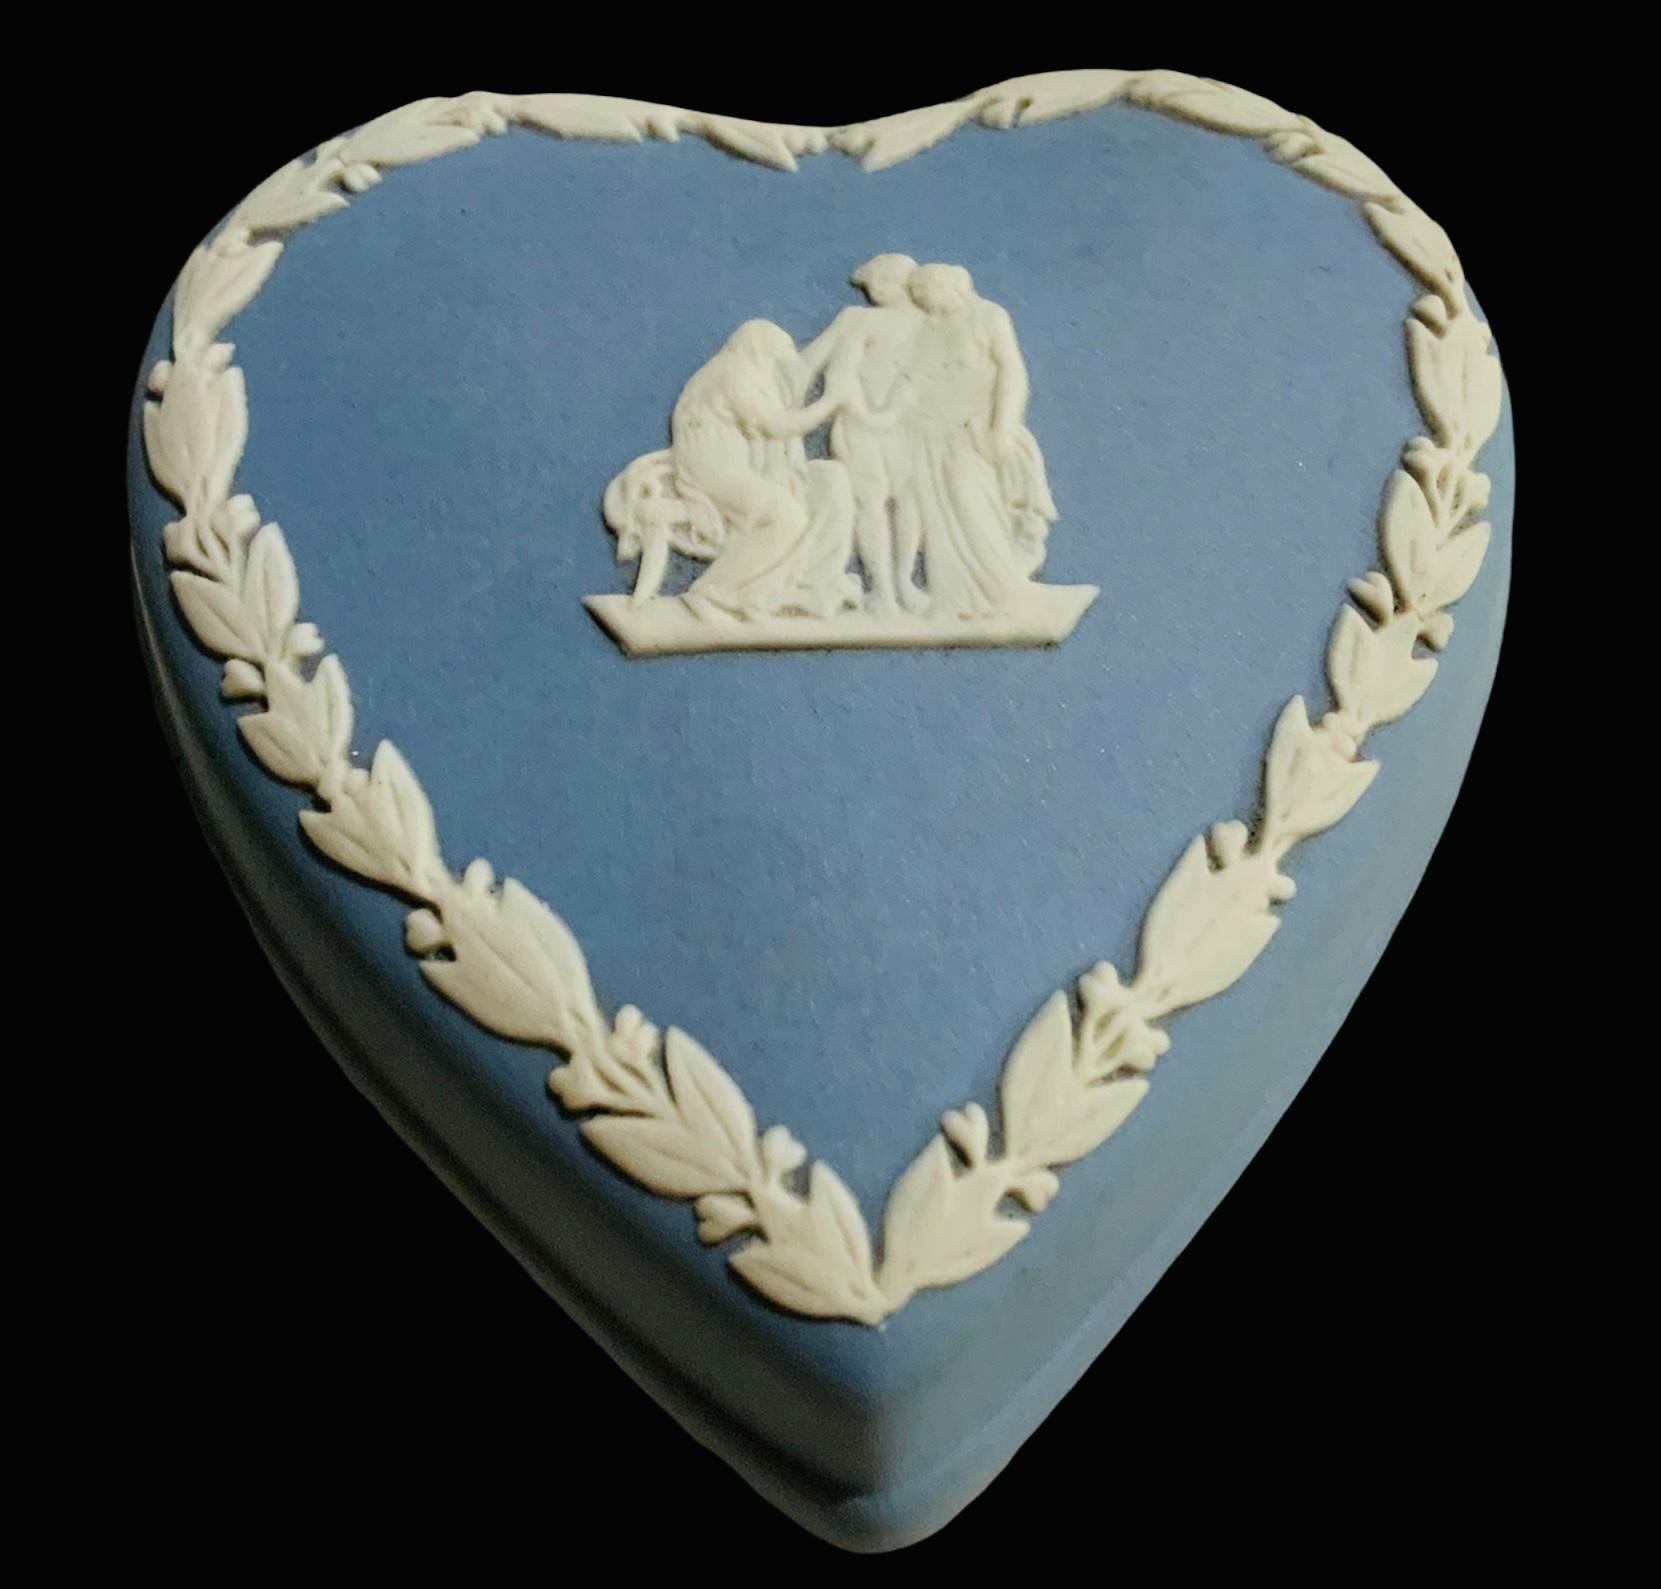 This is a light blue Wedgwood heart shaped small lidded box. The top of its lid is decorated with a Greek or Roman relief scene of a woman with a cape covering her head sat in small bench talking or giving a blessing to a young couple that are